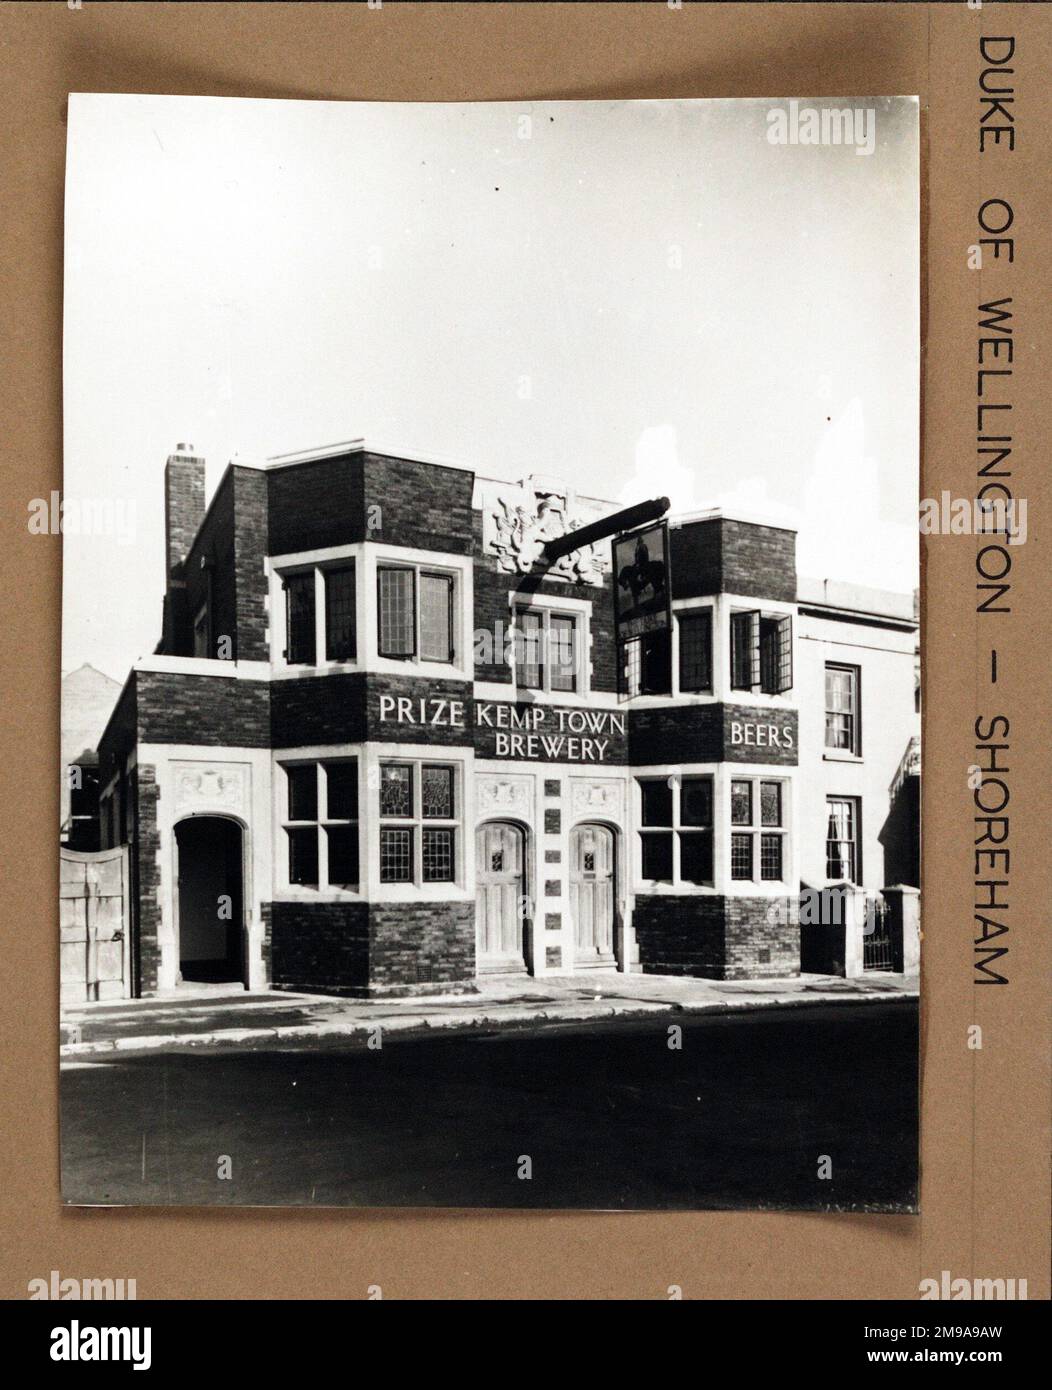 Photograph of Duke Of Wellington PH, Shoreham, Sussex. The main side of the print (shown here) depicts: Left Face on view of the pub.  The back of the print (available on request) details: Nothing for the Duke Of Wellington, Shoreham, Sussex BN43 6RE. As of July 2018 . Formerly a Dark Star pub, but now owned by former Dark Star director and brewer, Asset (Crawford Street) Limited. Stock Photo